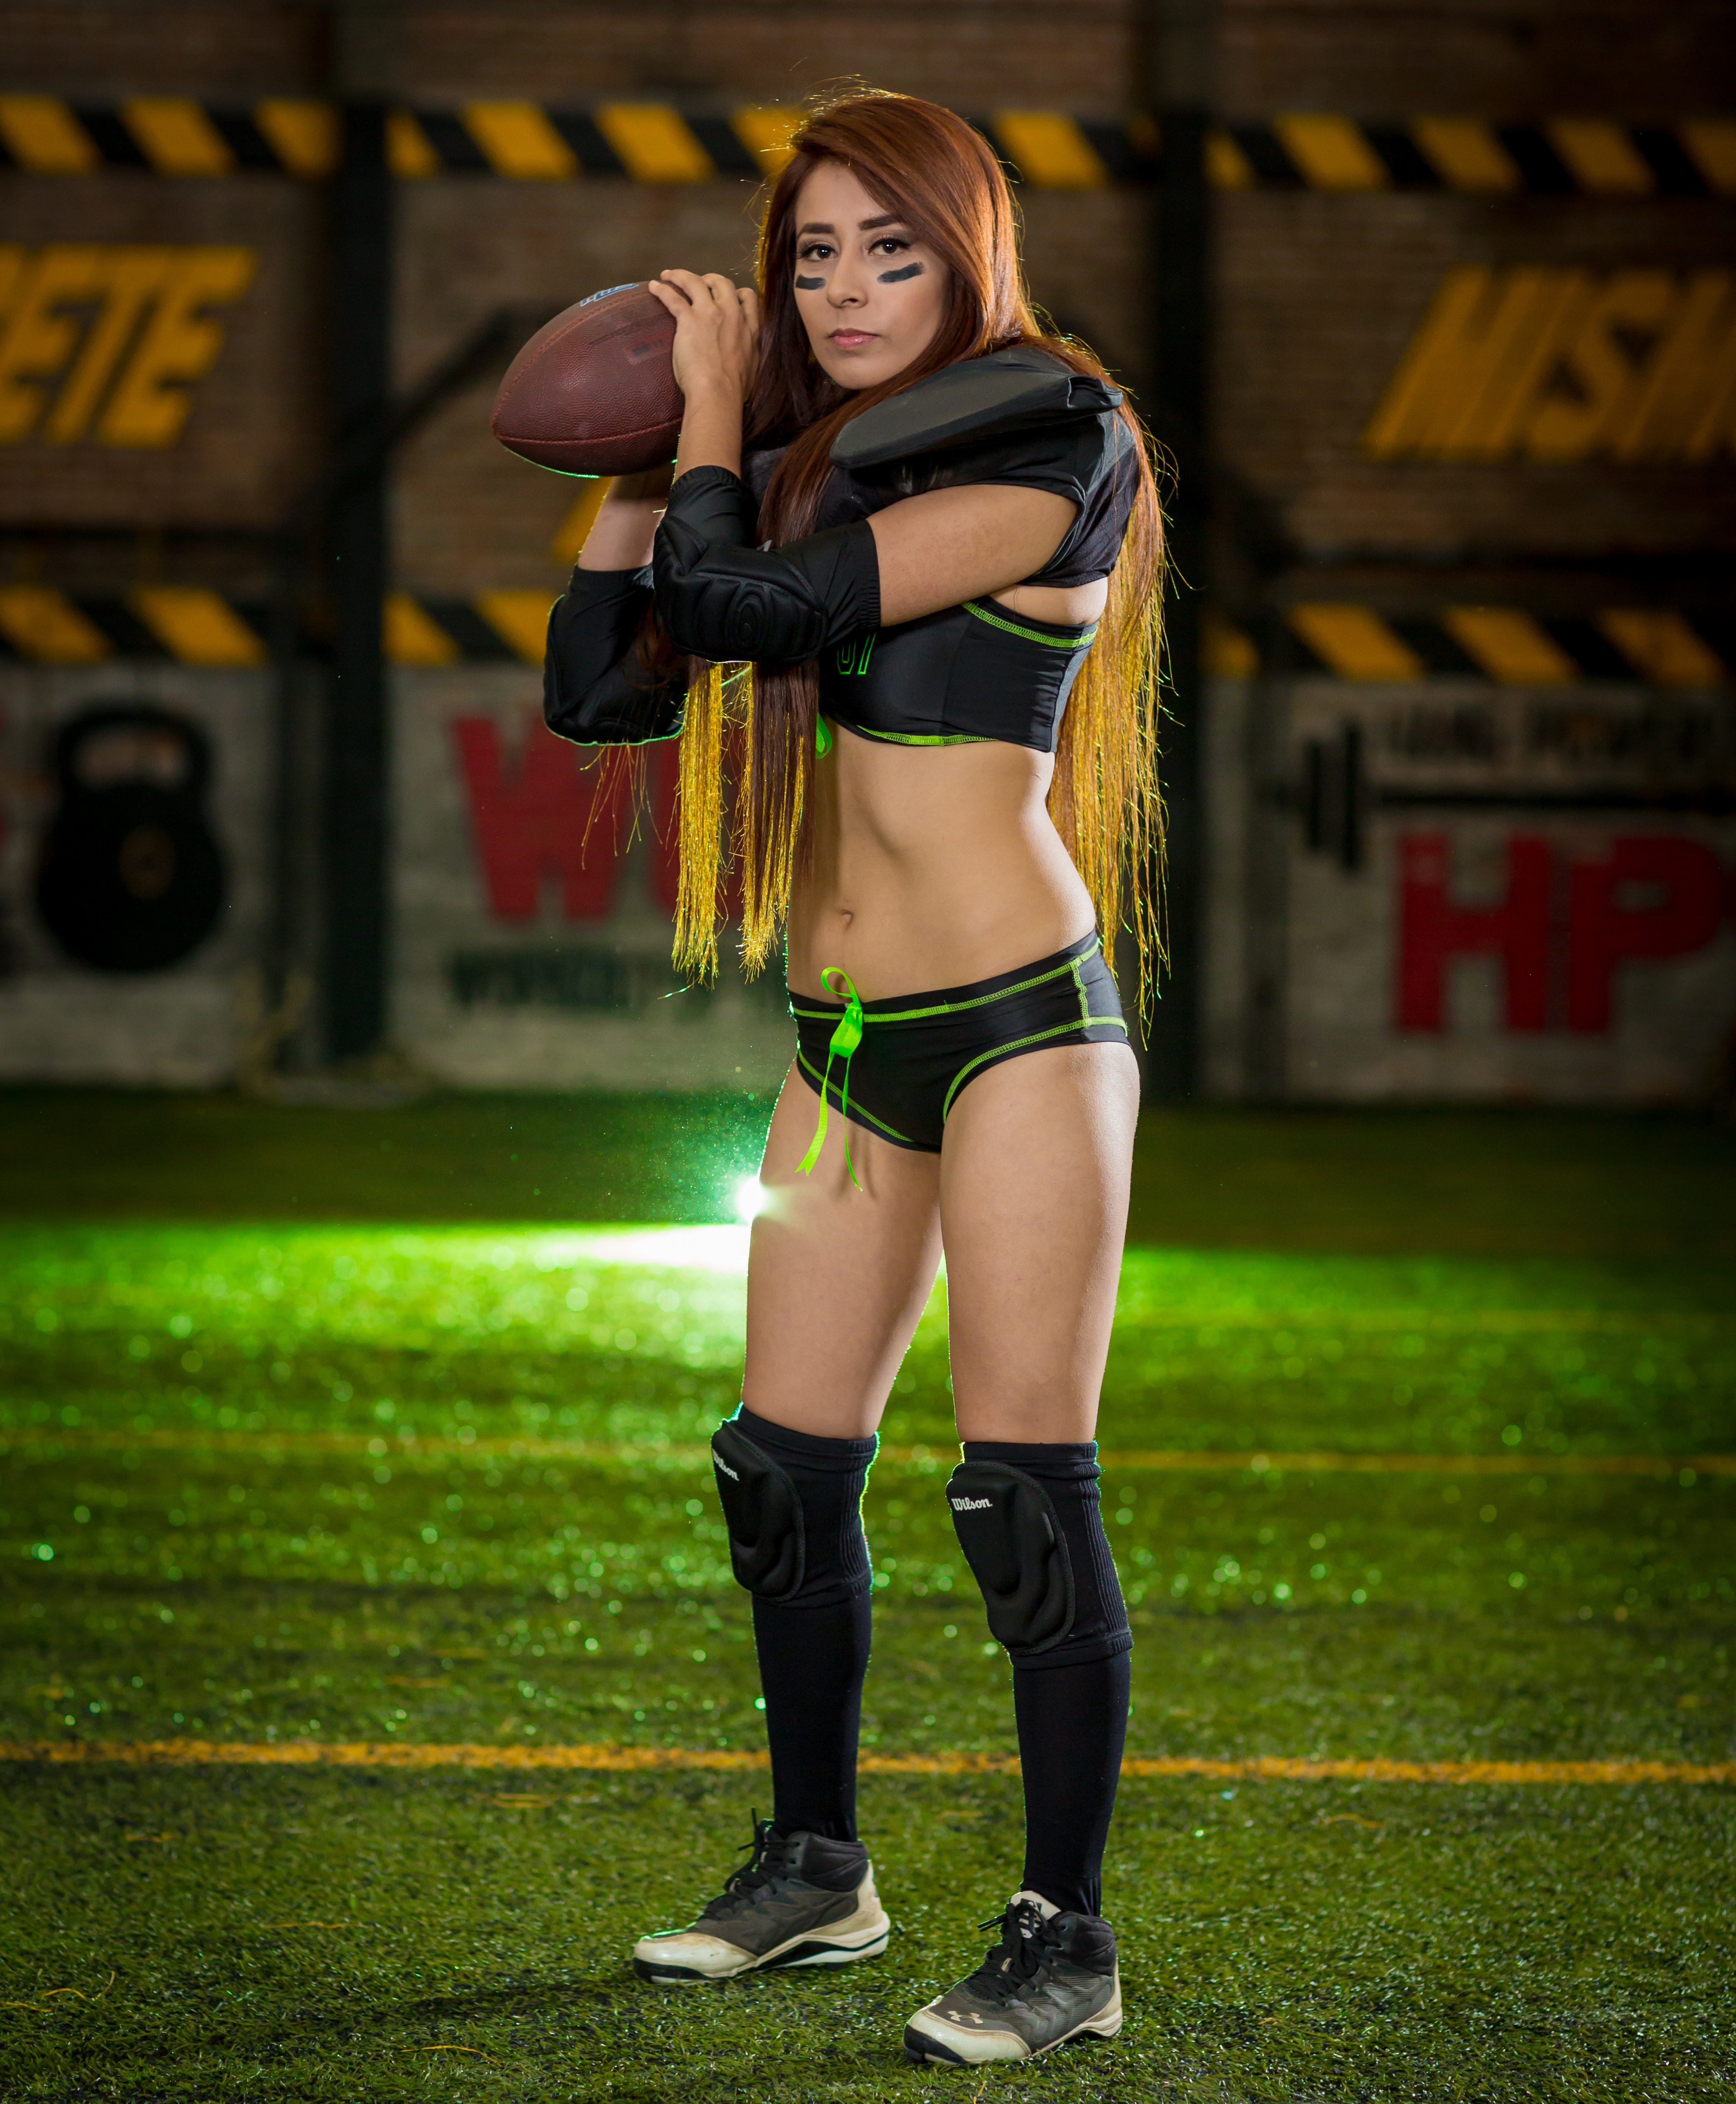 Woman Wearing Black-and-green Sports Bra and Pantie Holding Rugby Ball, Adult, Holding, Wear, Training, HQ Photo